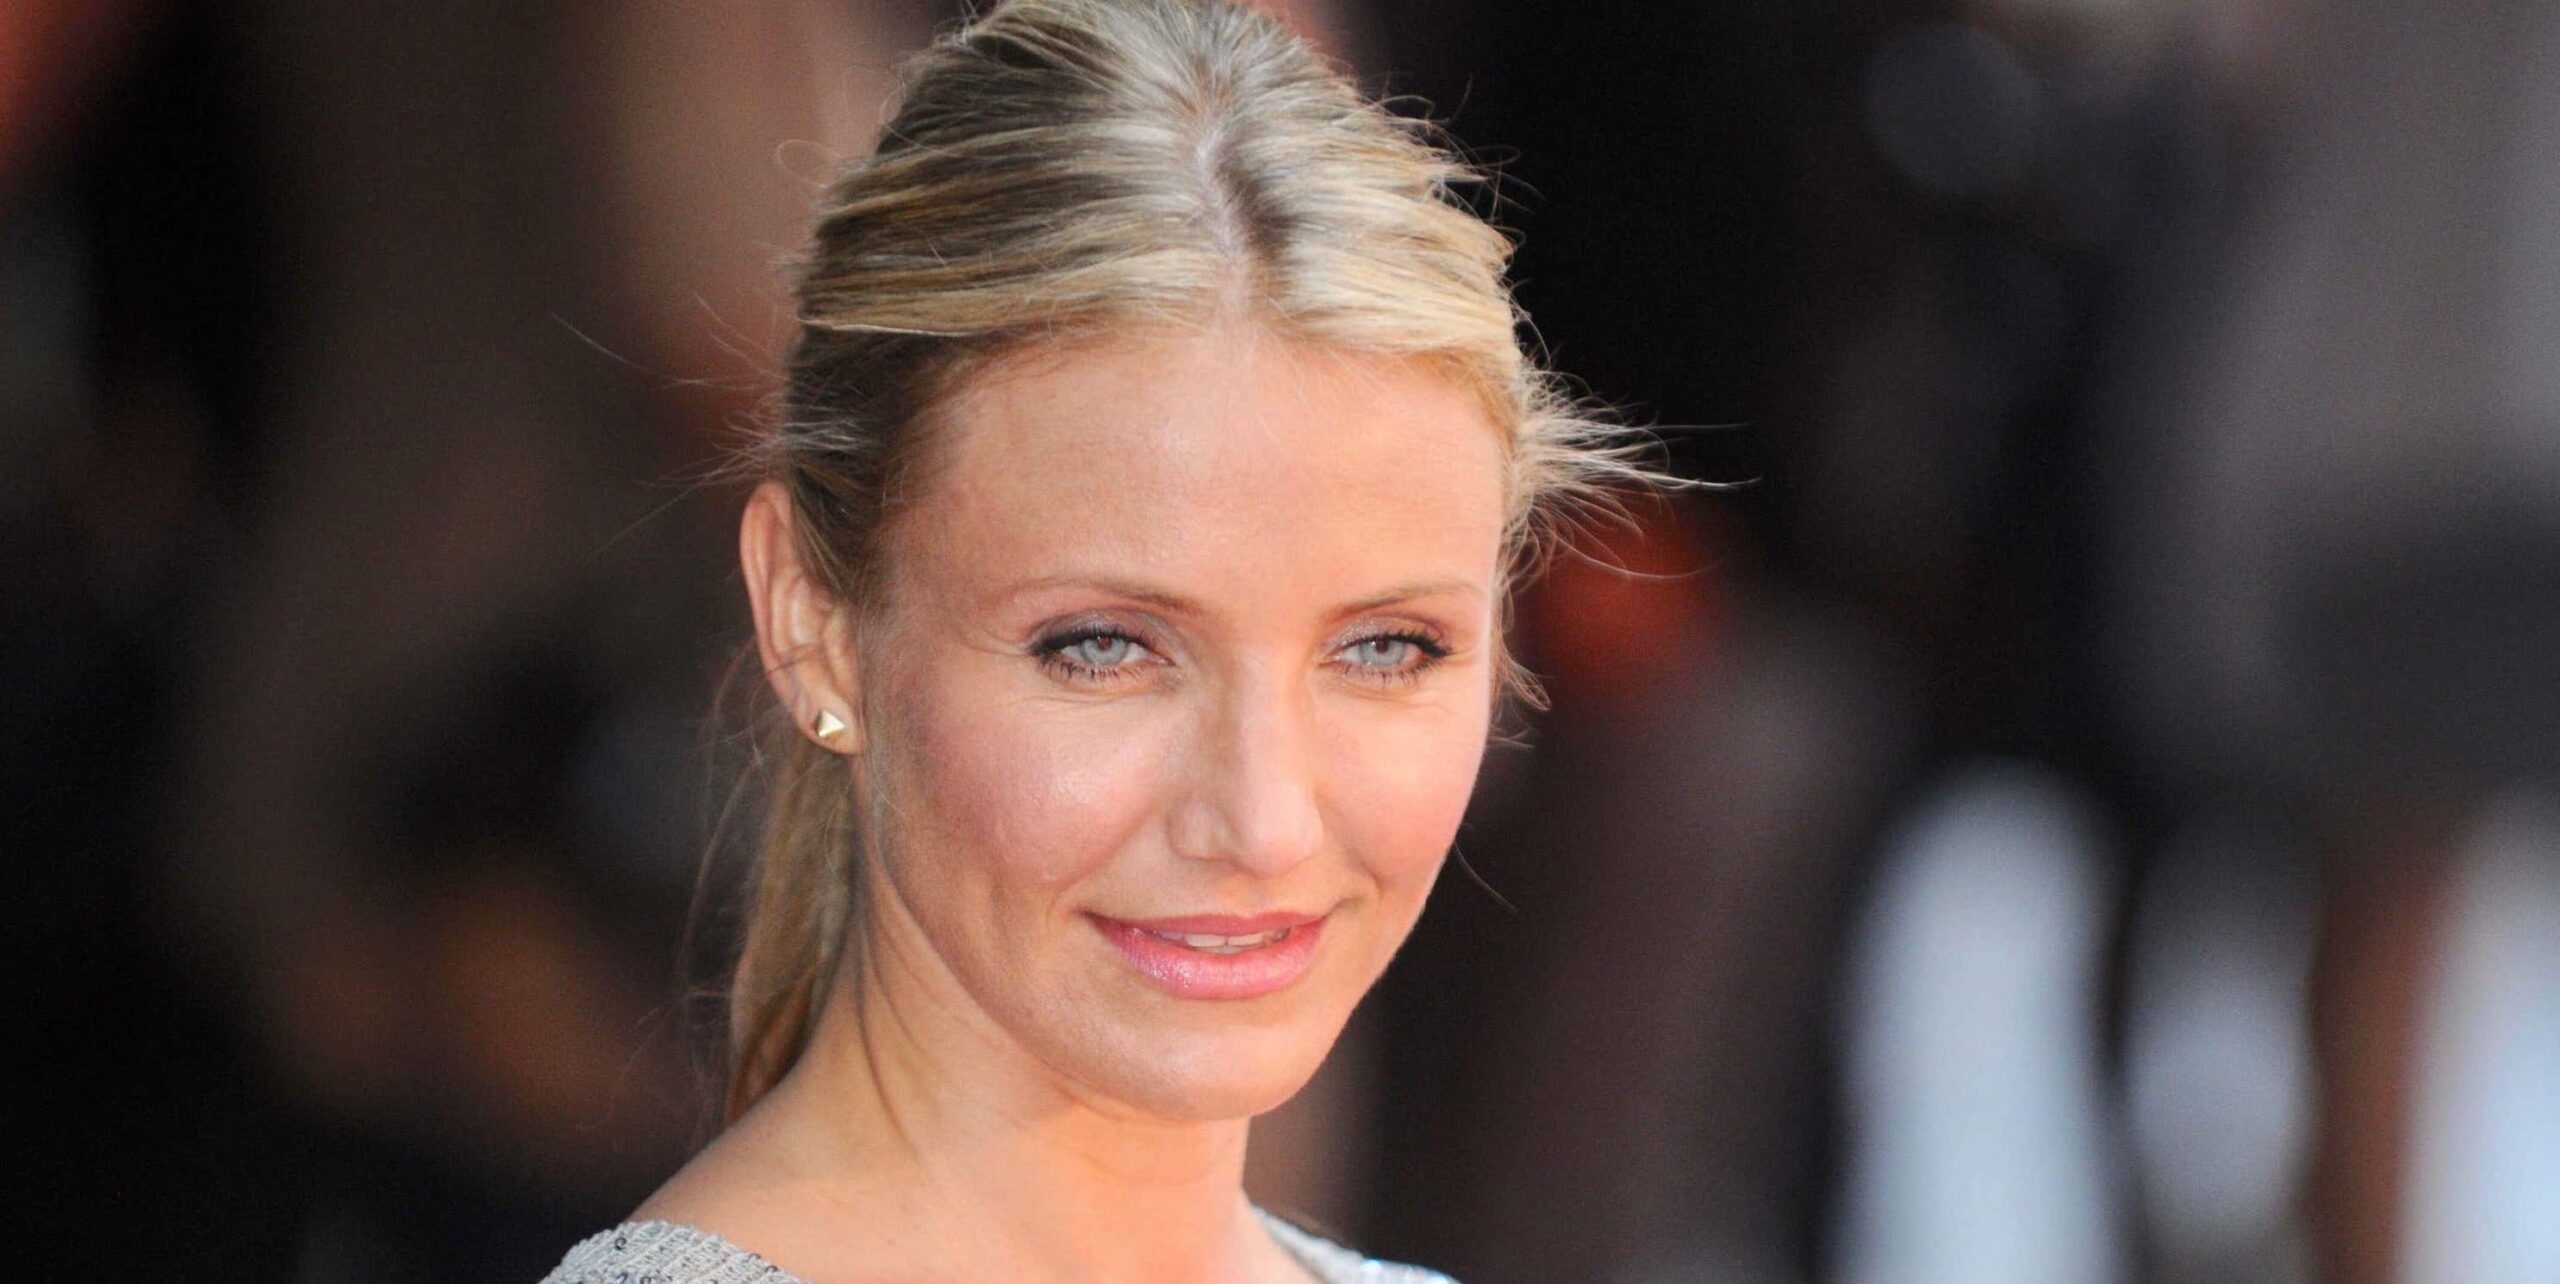 Cameron diaz returns to acting: why it’s ok to take a break in your career